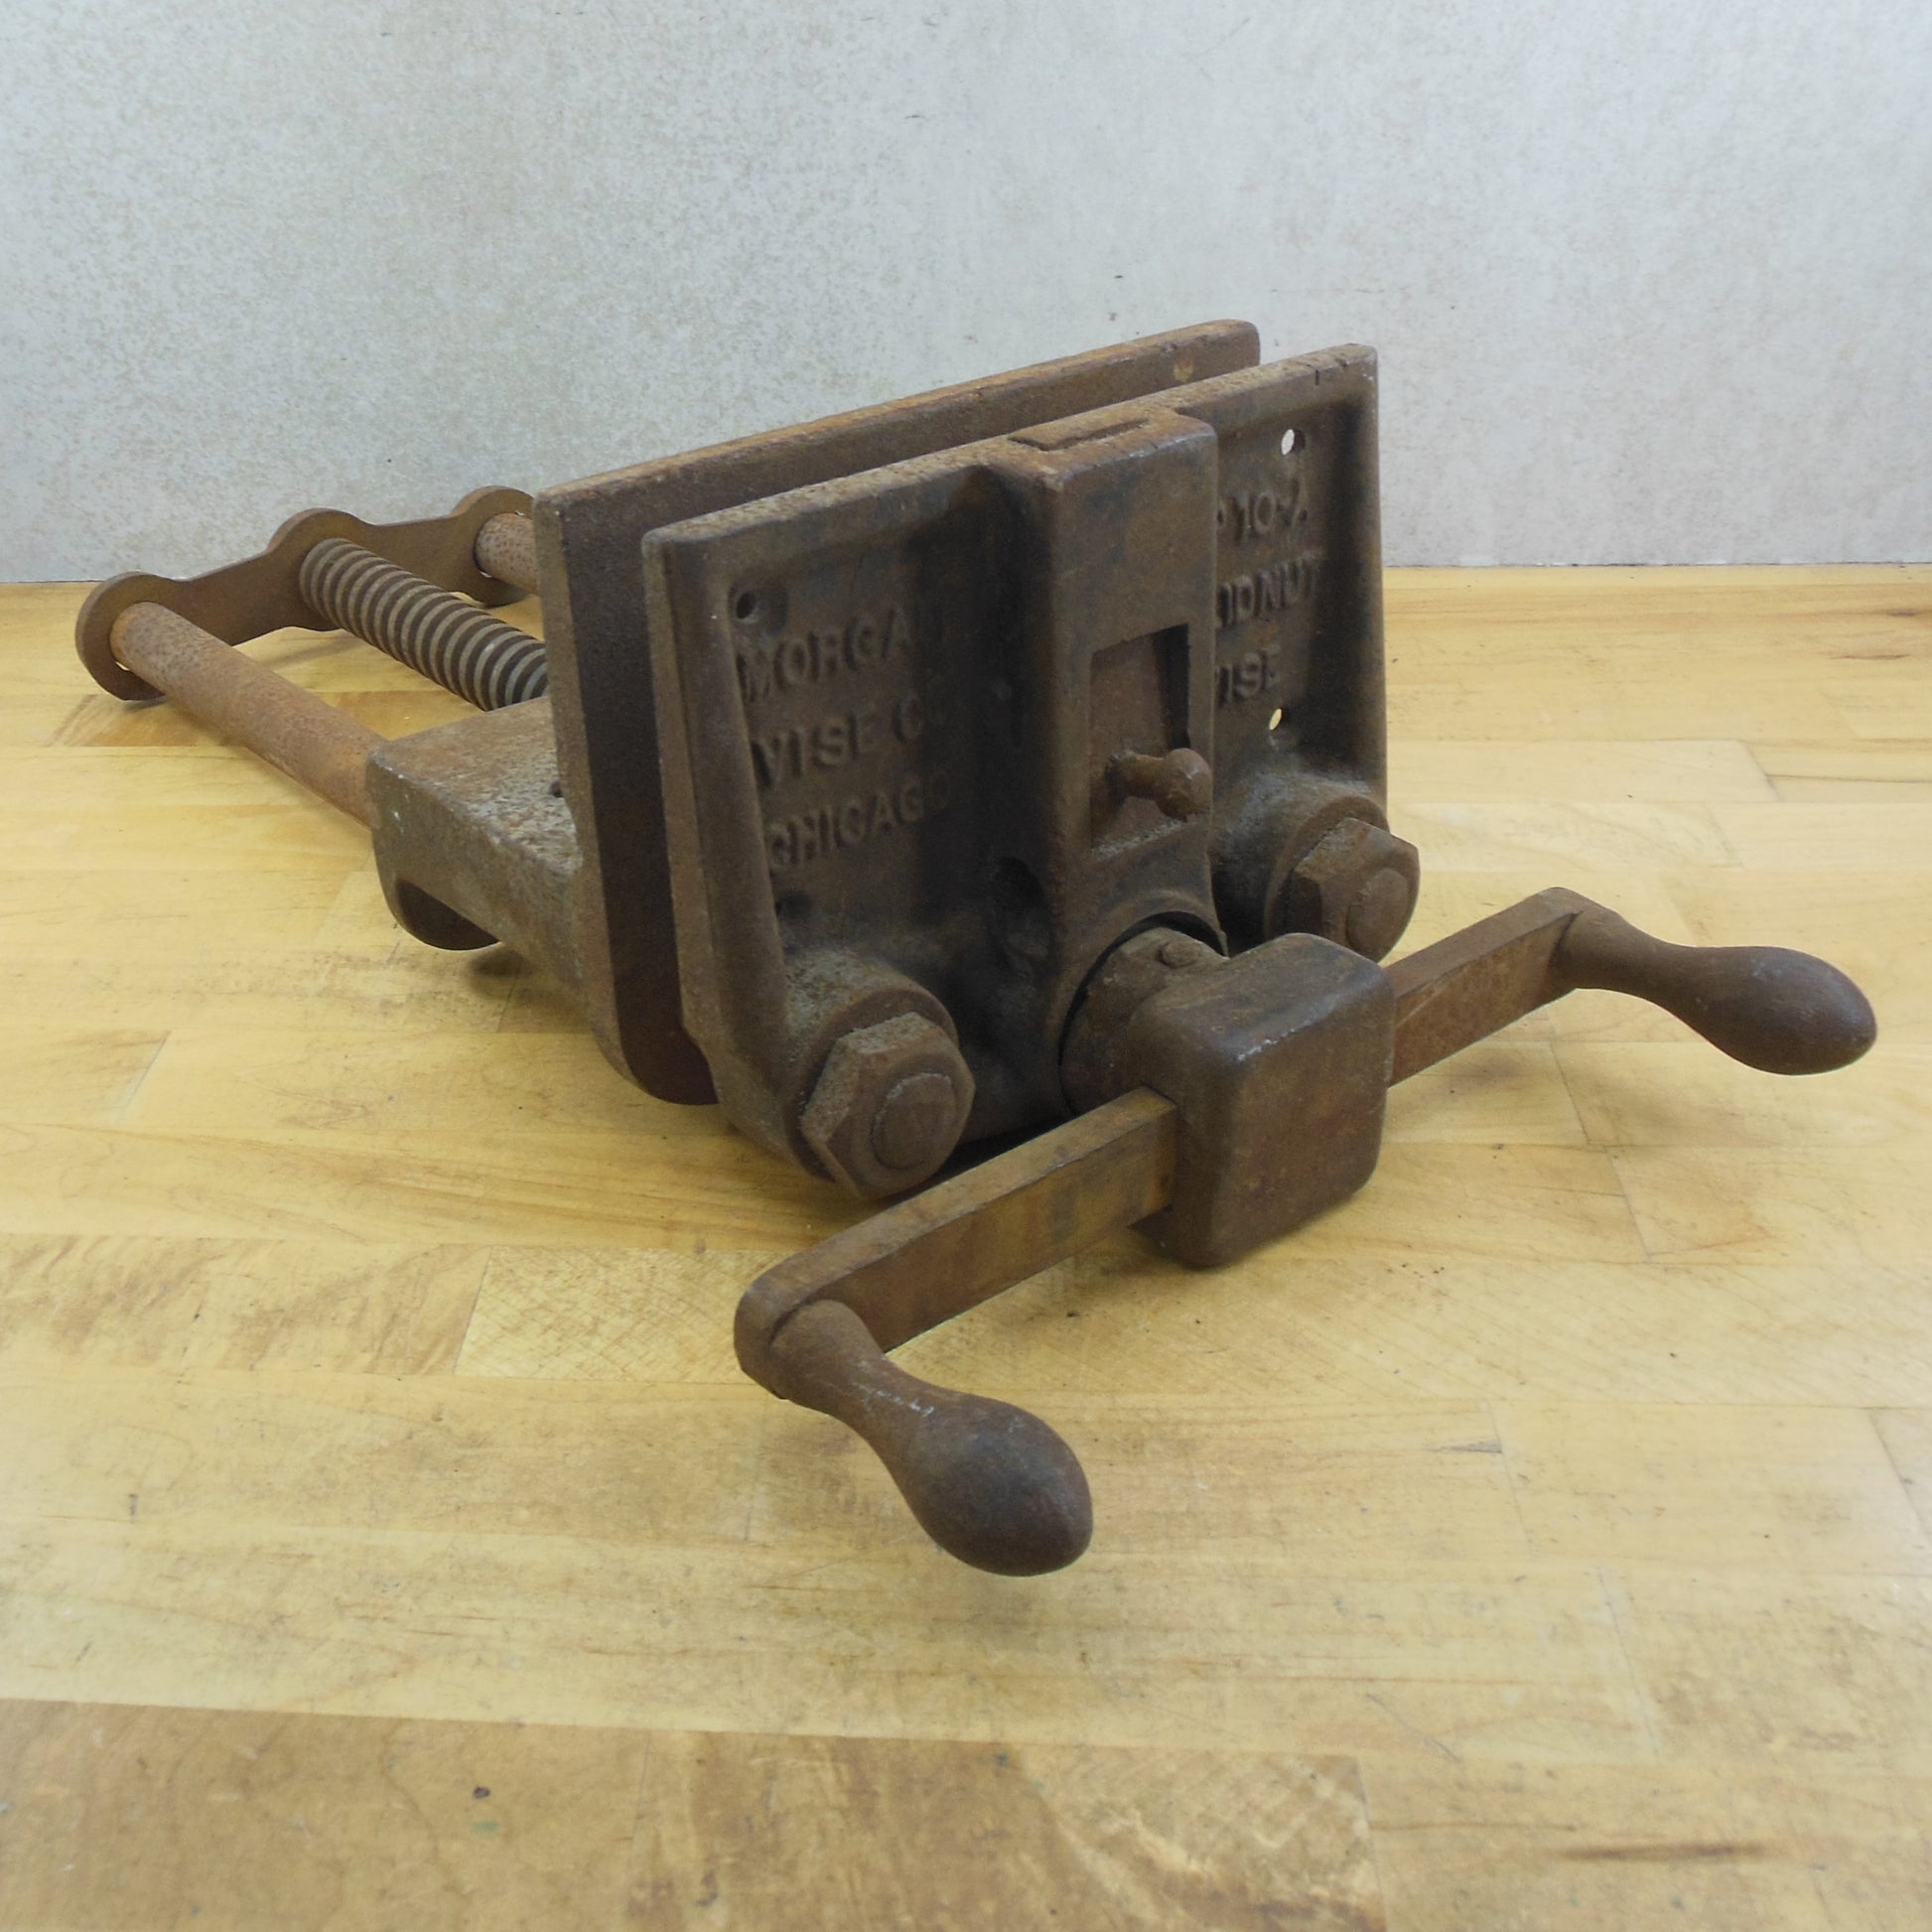 Vintage Morgan Vise 100A Quick Release Under and similar items